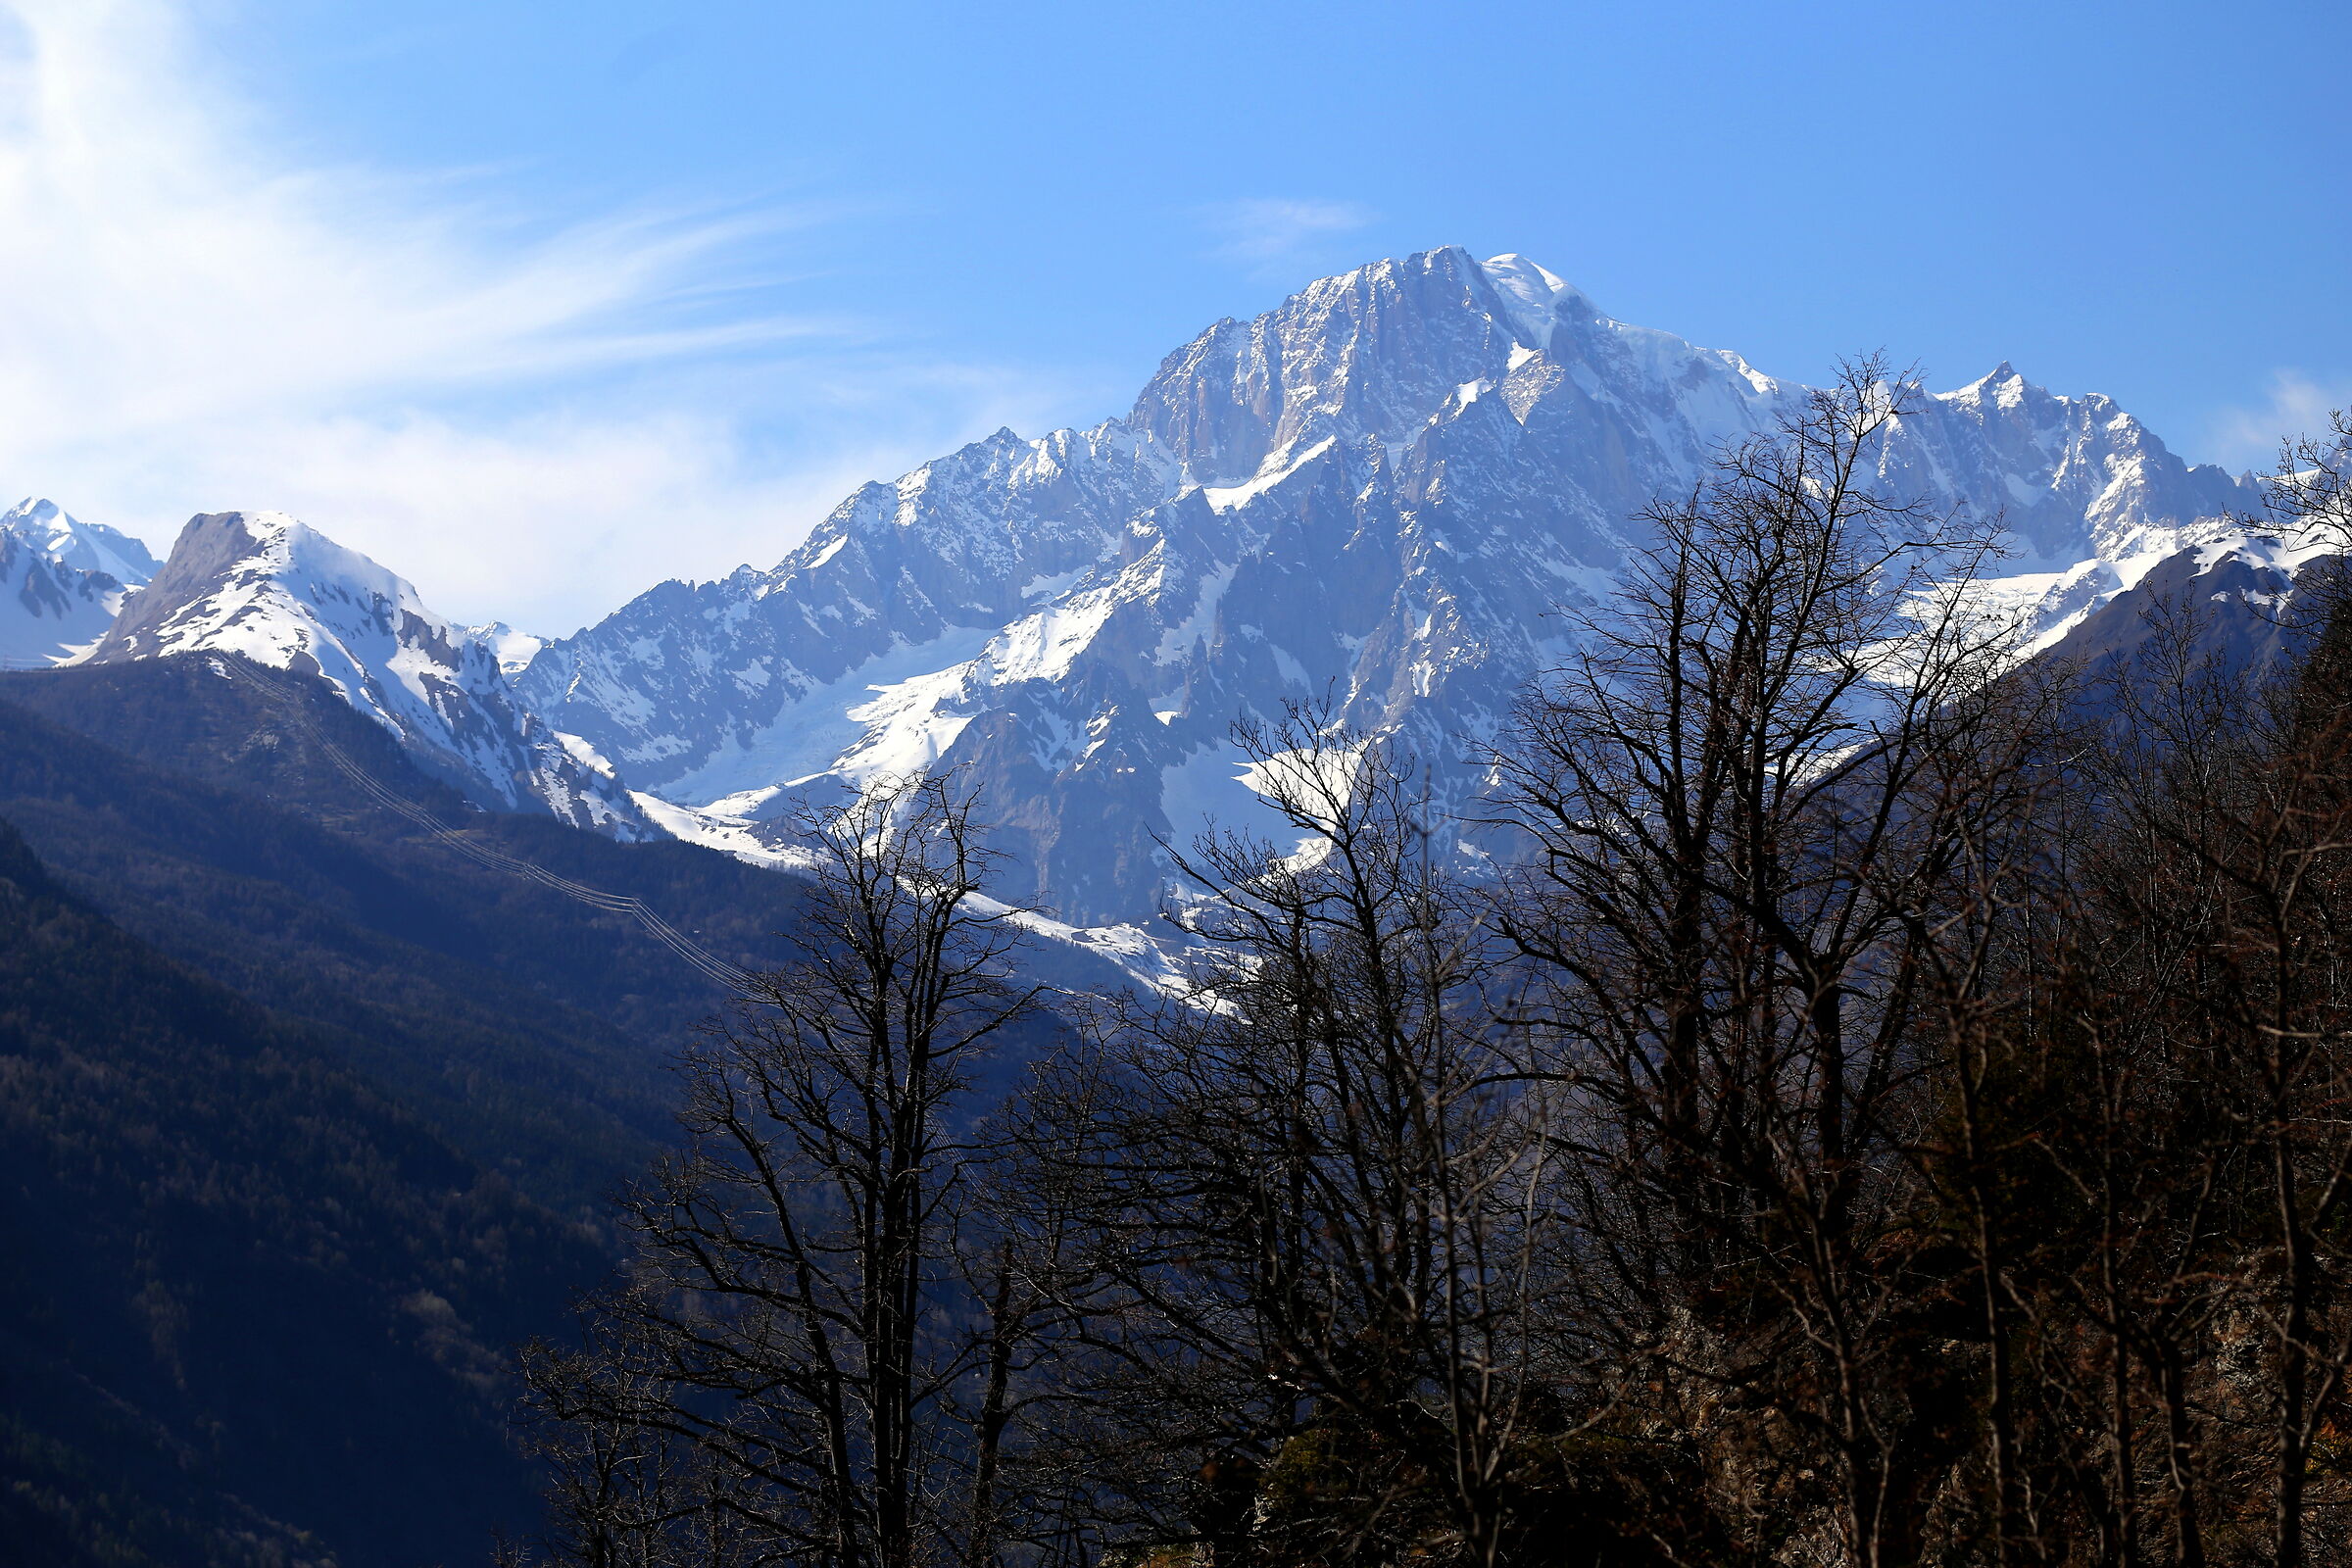 HIS MAJESTY THE MONT BLANC...